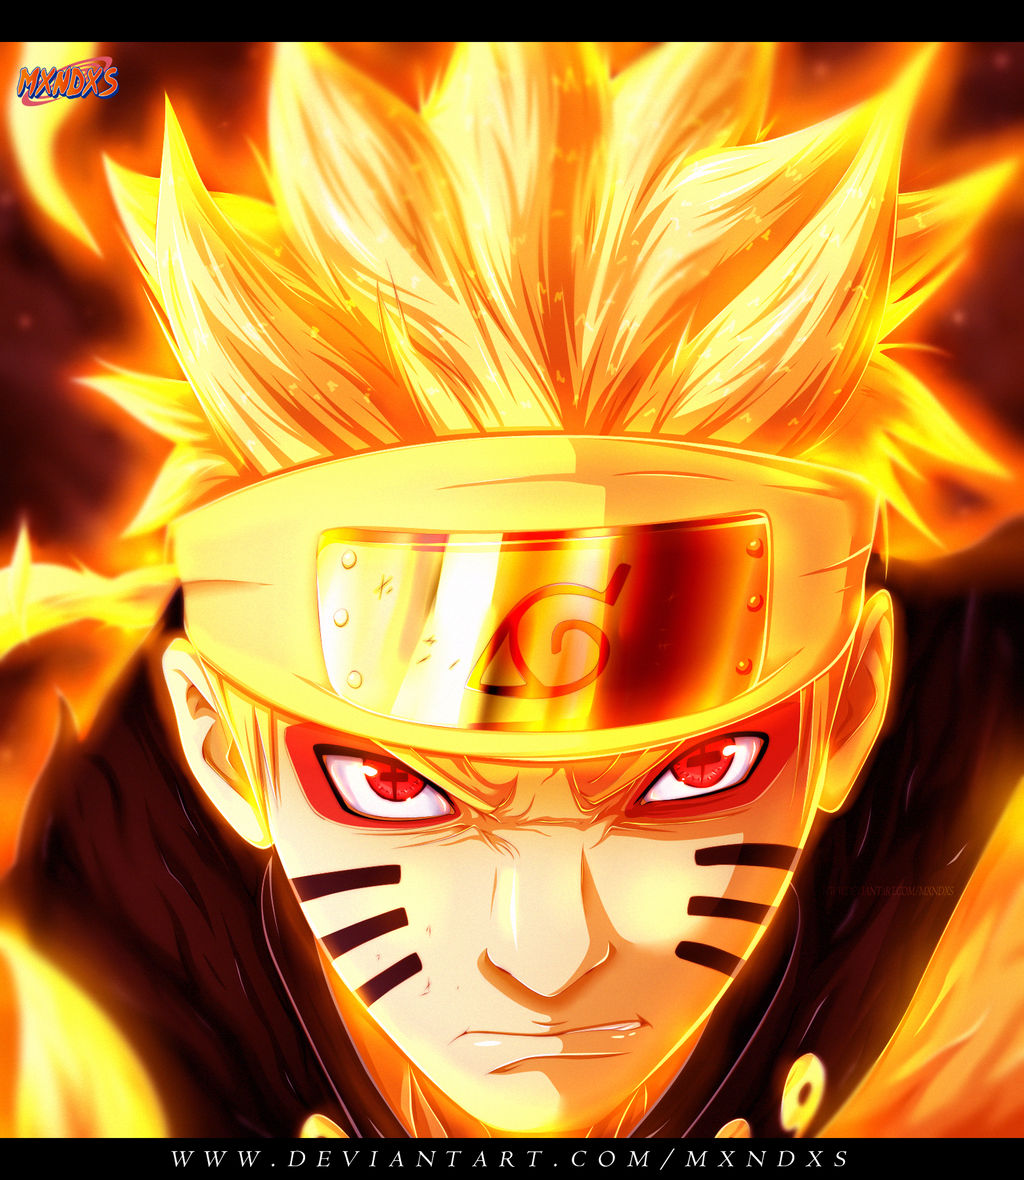 Naruto 647 - I won't let it all go to waste! by mxndxs on DeviantArt